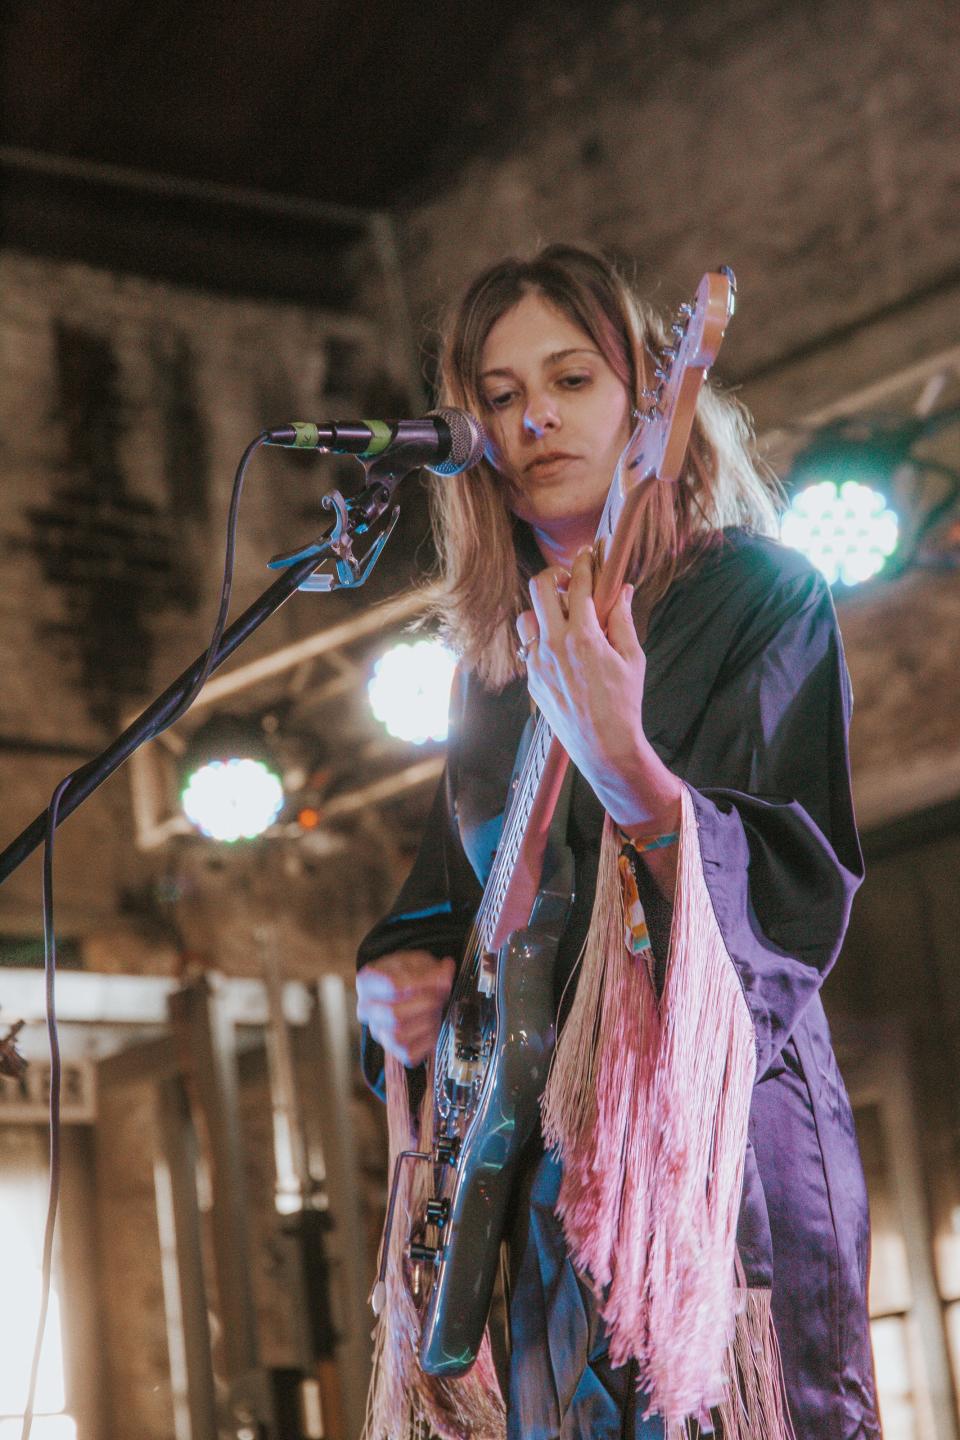 Fauvely plays at the 2022 Savannah Stopover Music Festival on Saturday, March 12, 2022.